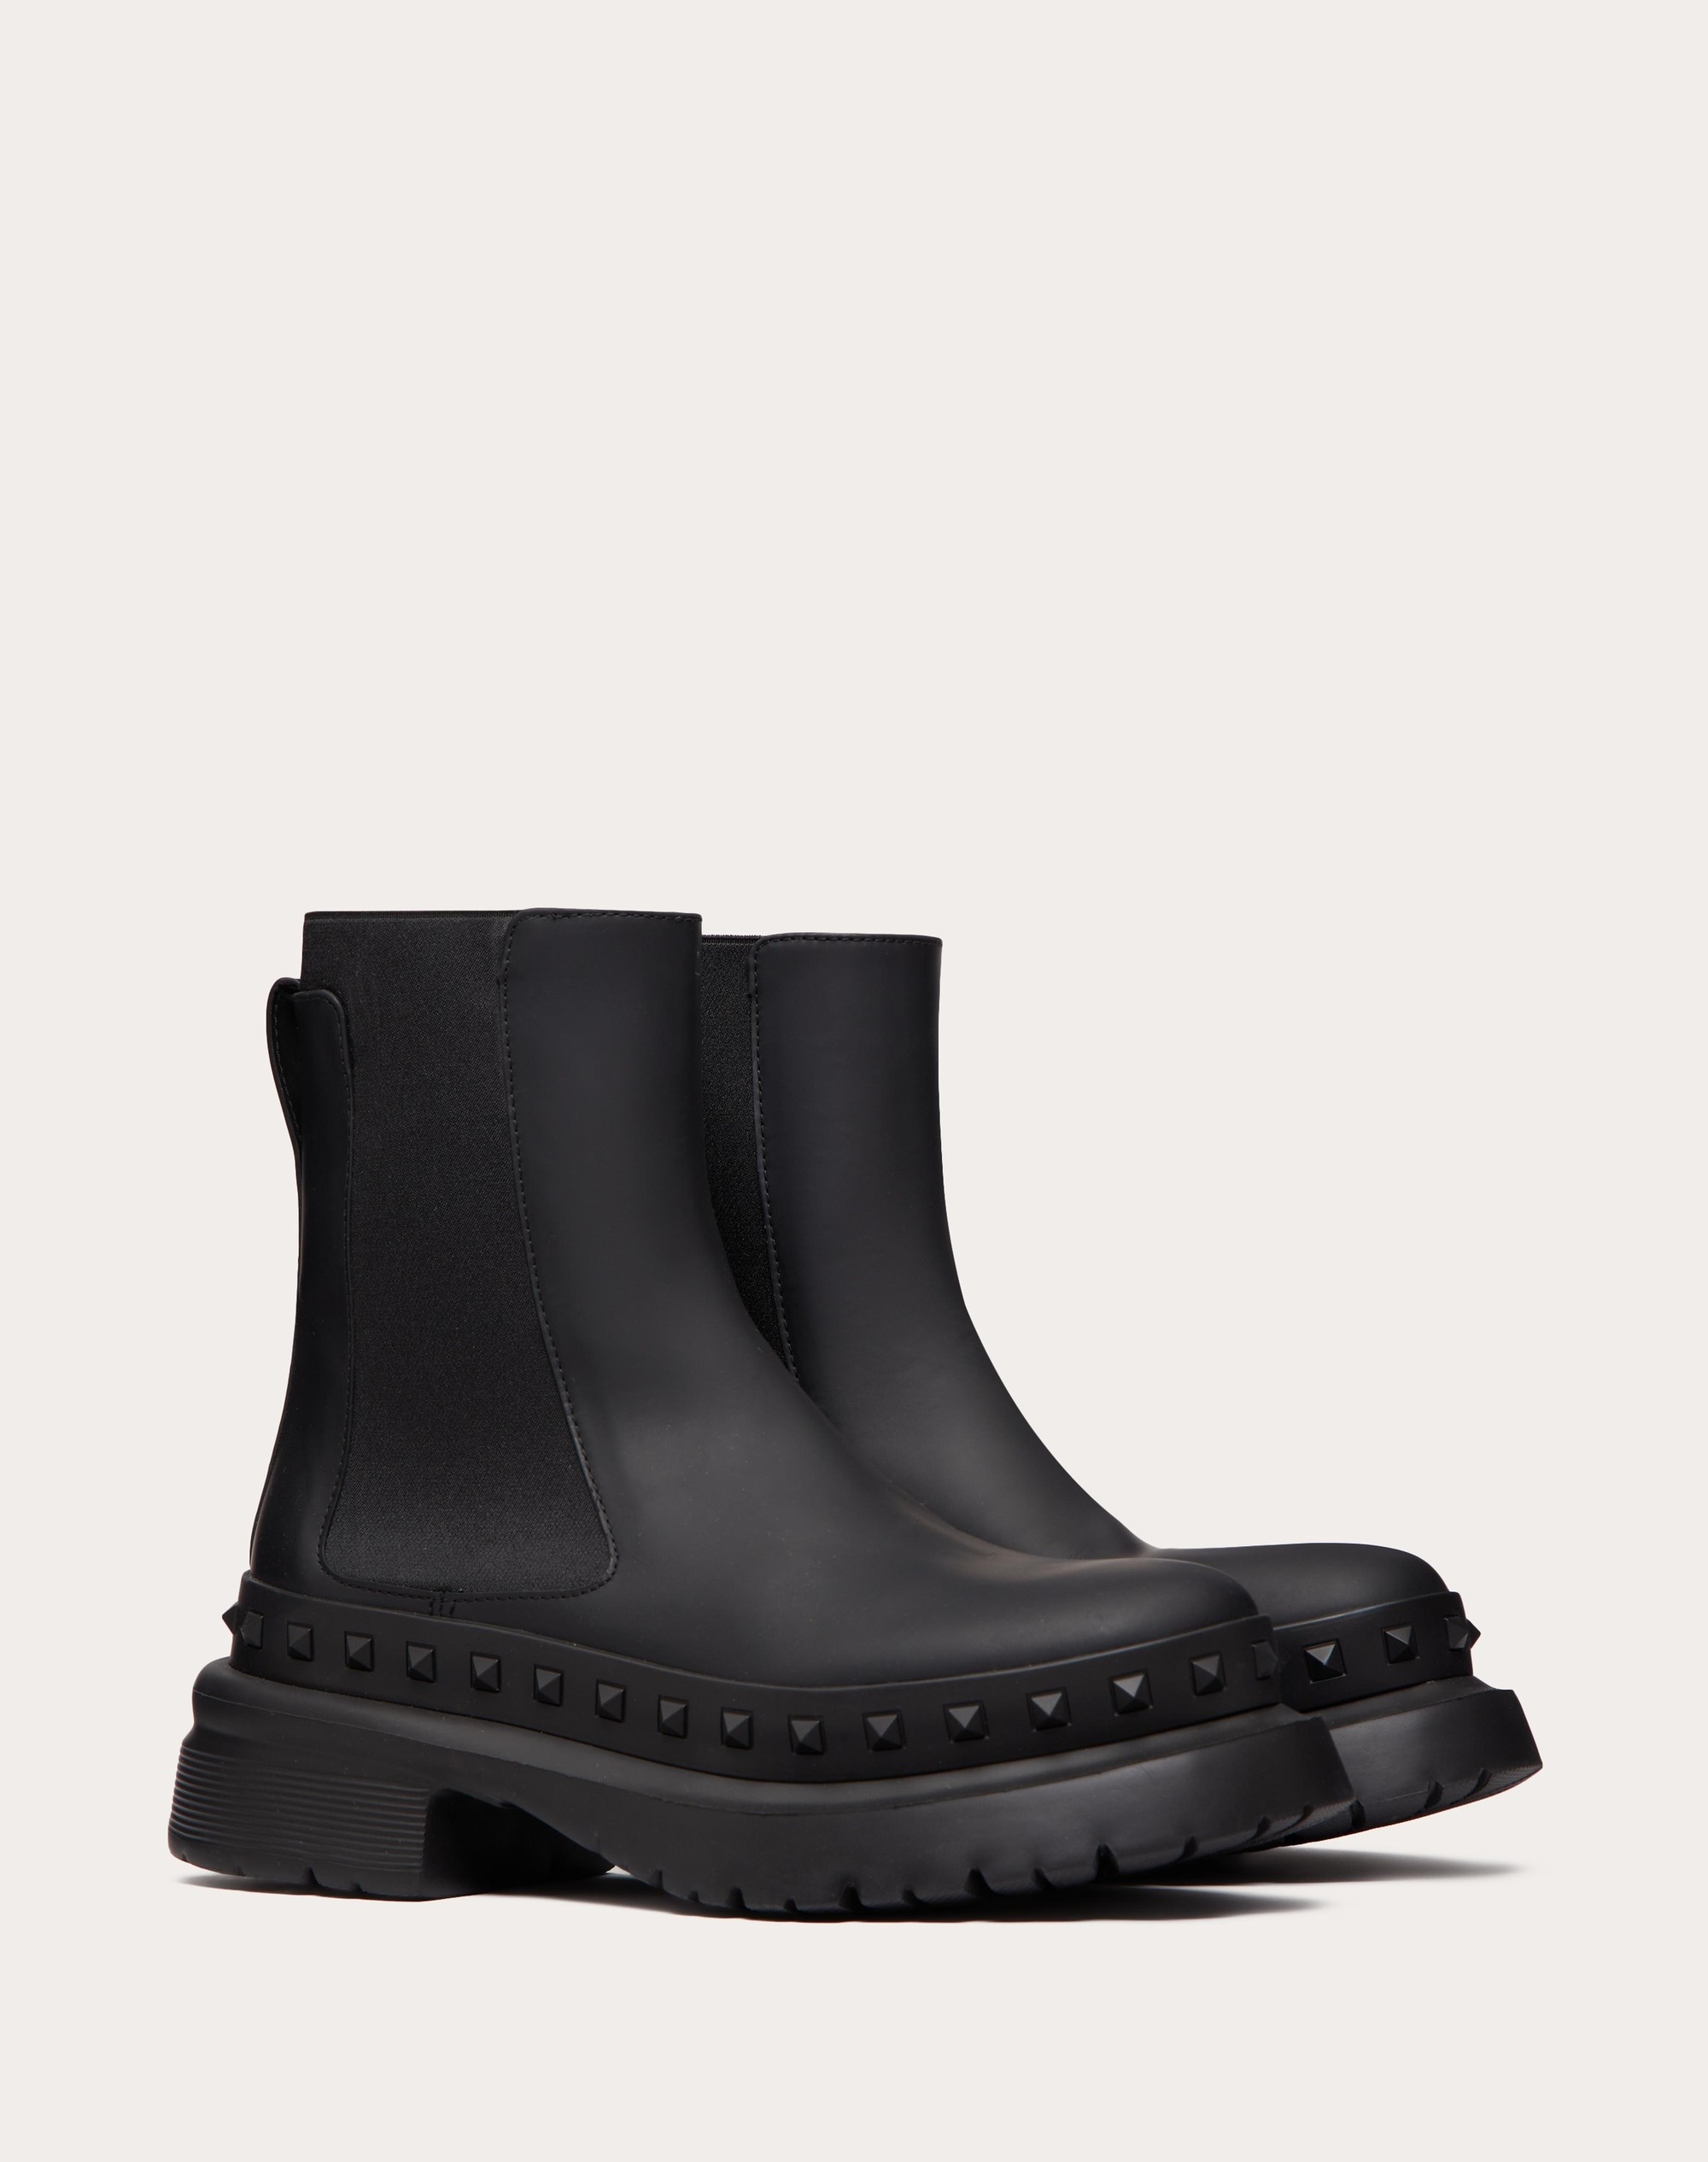 M-WAY ROCKSTUD ANKLE BOOT IN CALFSKIN LEATHER - 2